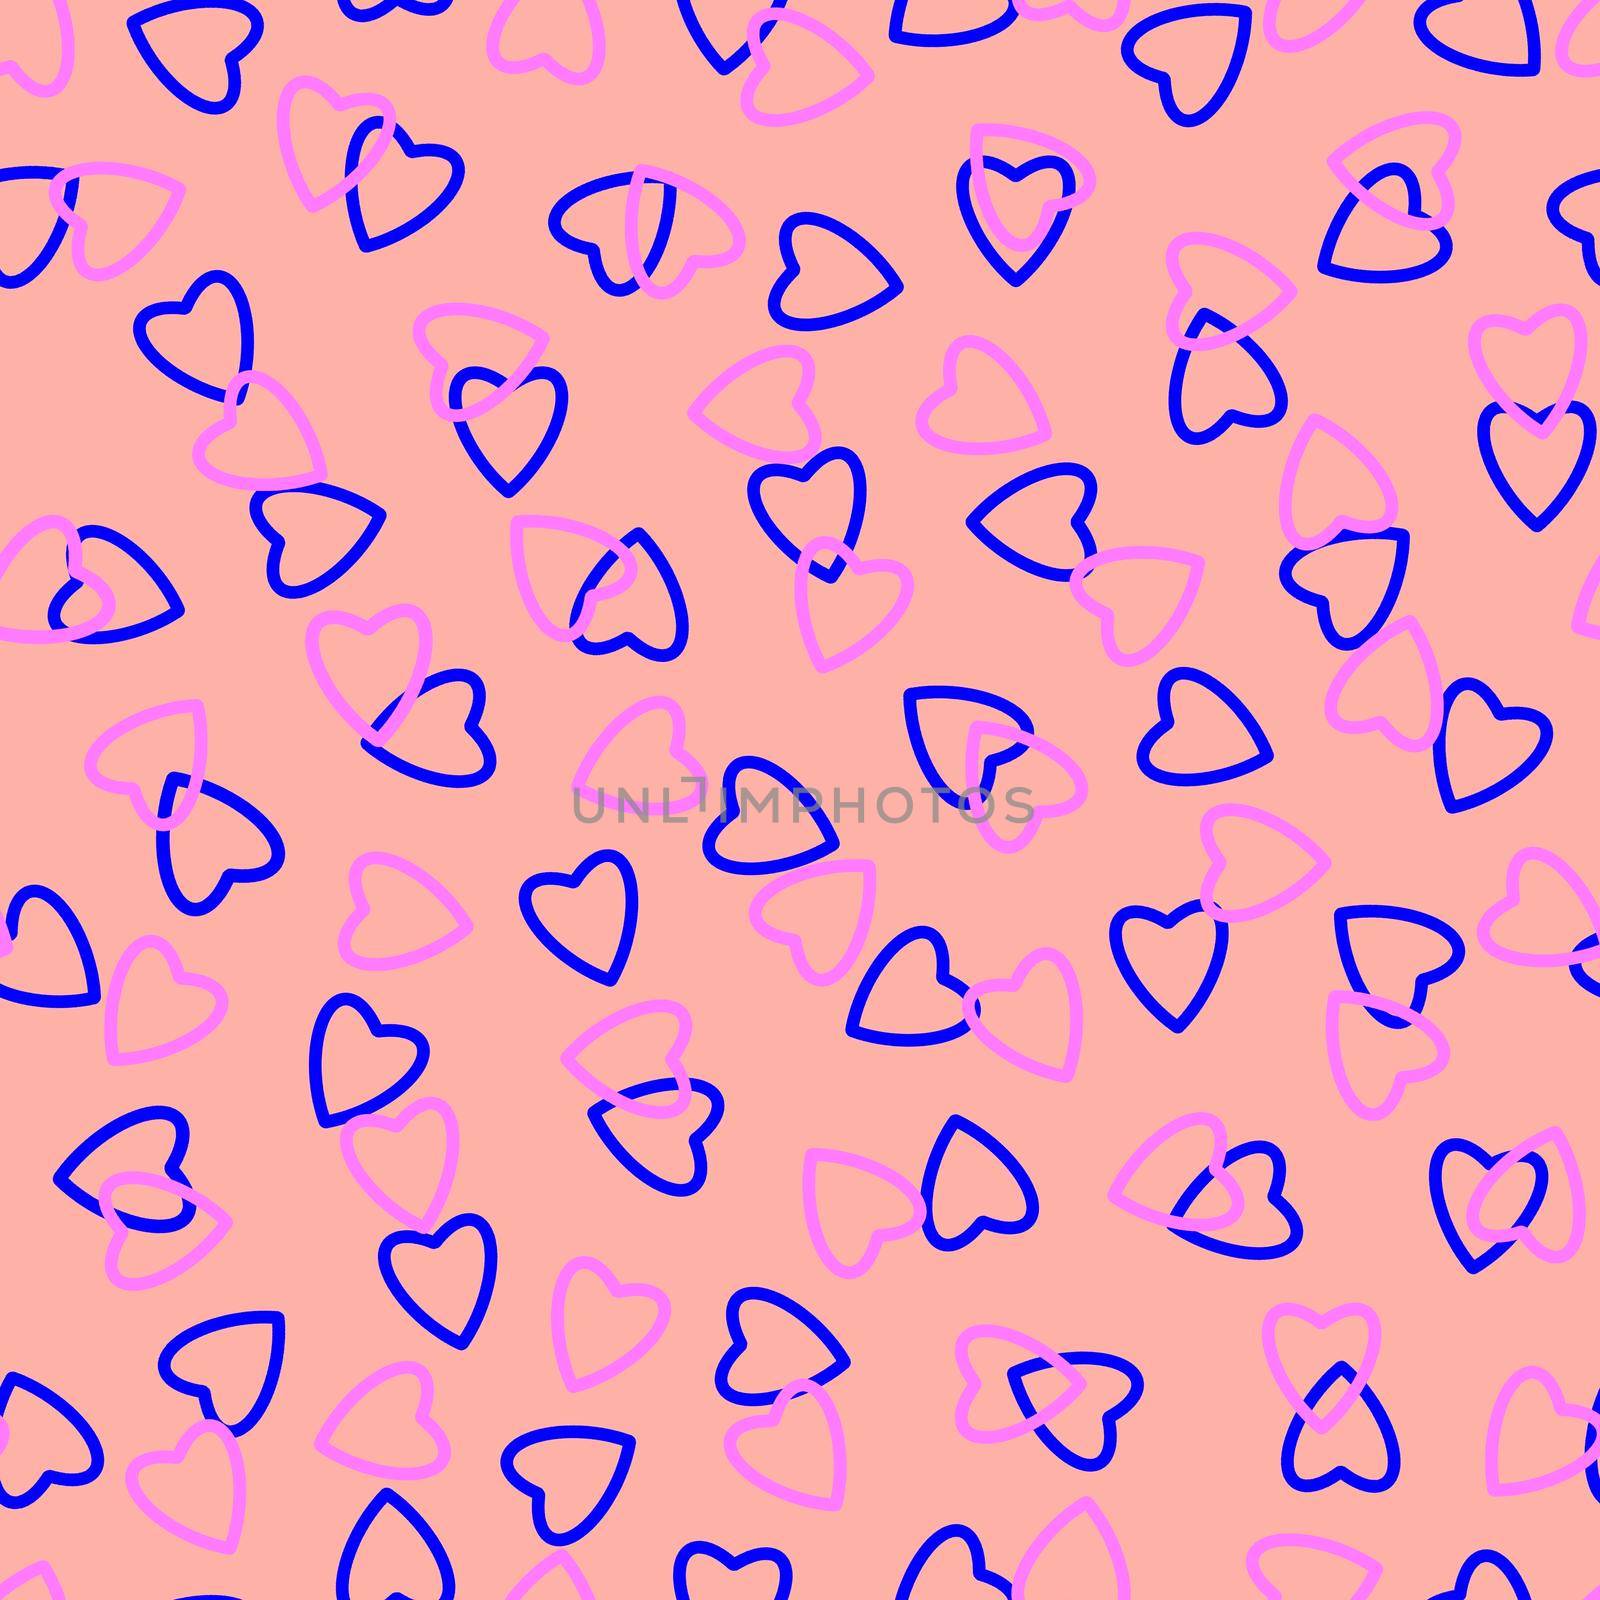 Simple hearts seamless pattern,endless chaotic texture made of tiny heart silhouettes.Valentines,mothers day background.Great for Easter,wedding,scrapbook,gift wrapping paper,textiles.Blue,lilac,peach by Angelsmoon